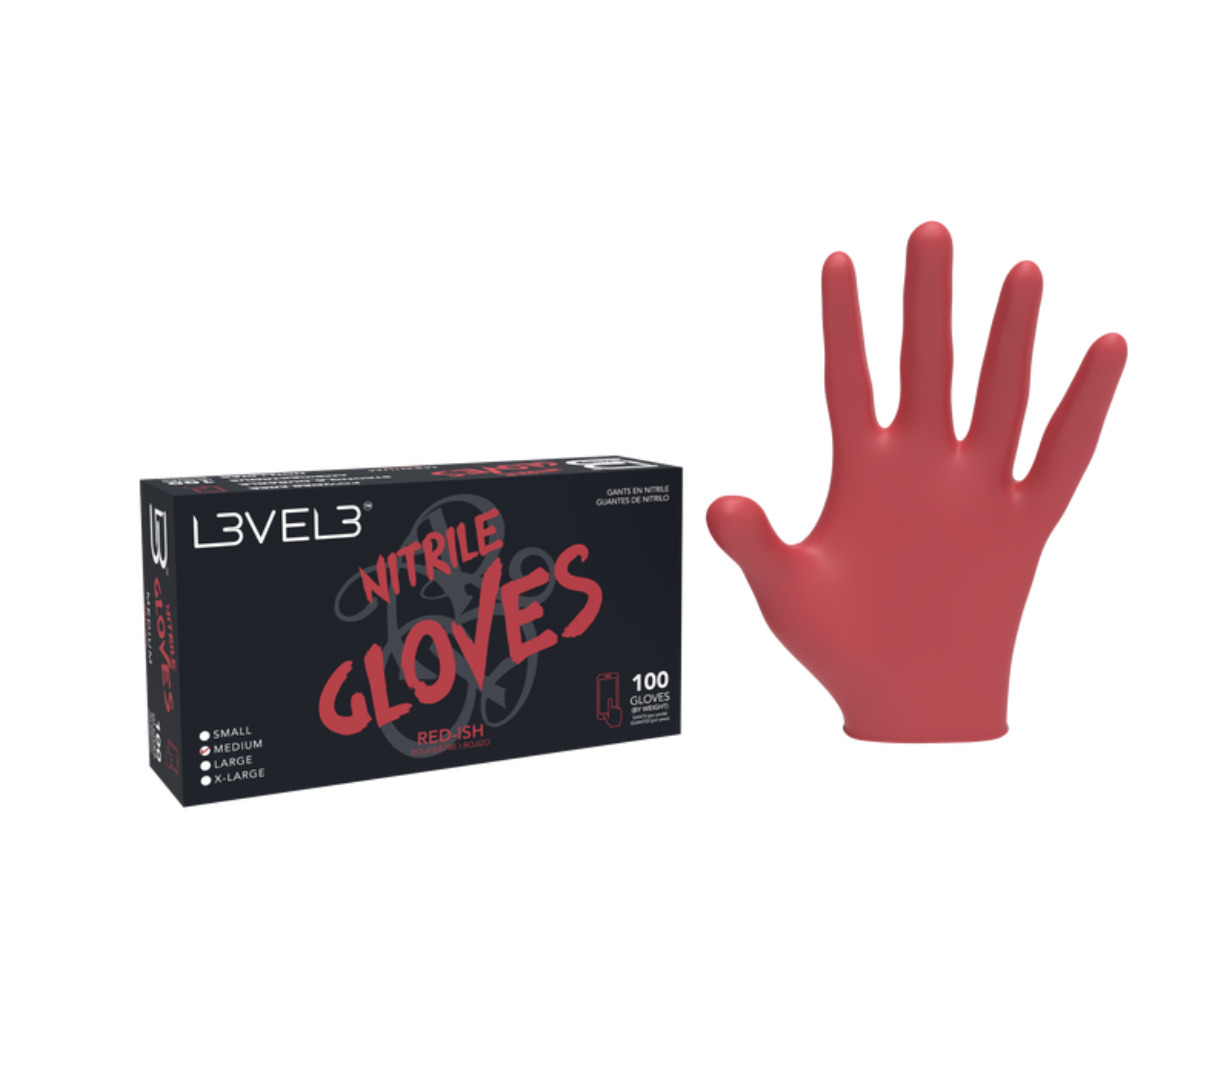 L3VEL3™ PROFESSIONAL NITRILE GLOVES 100ct - RED_ISH